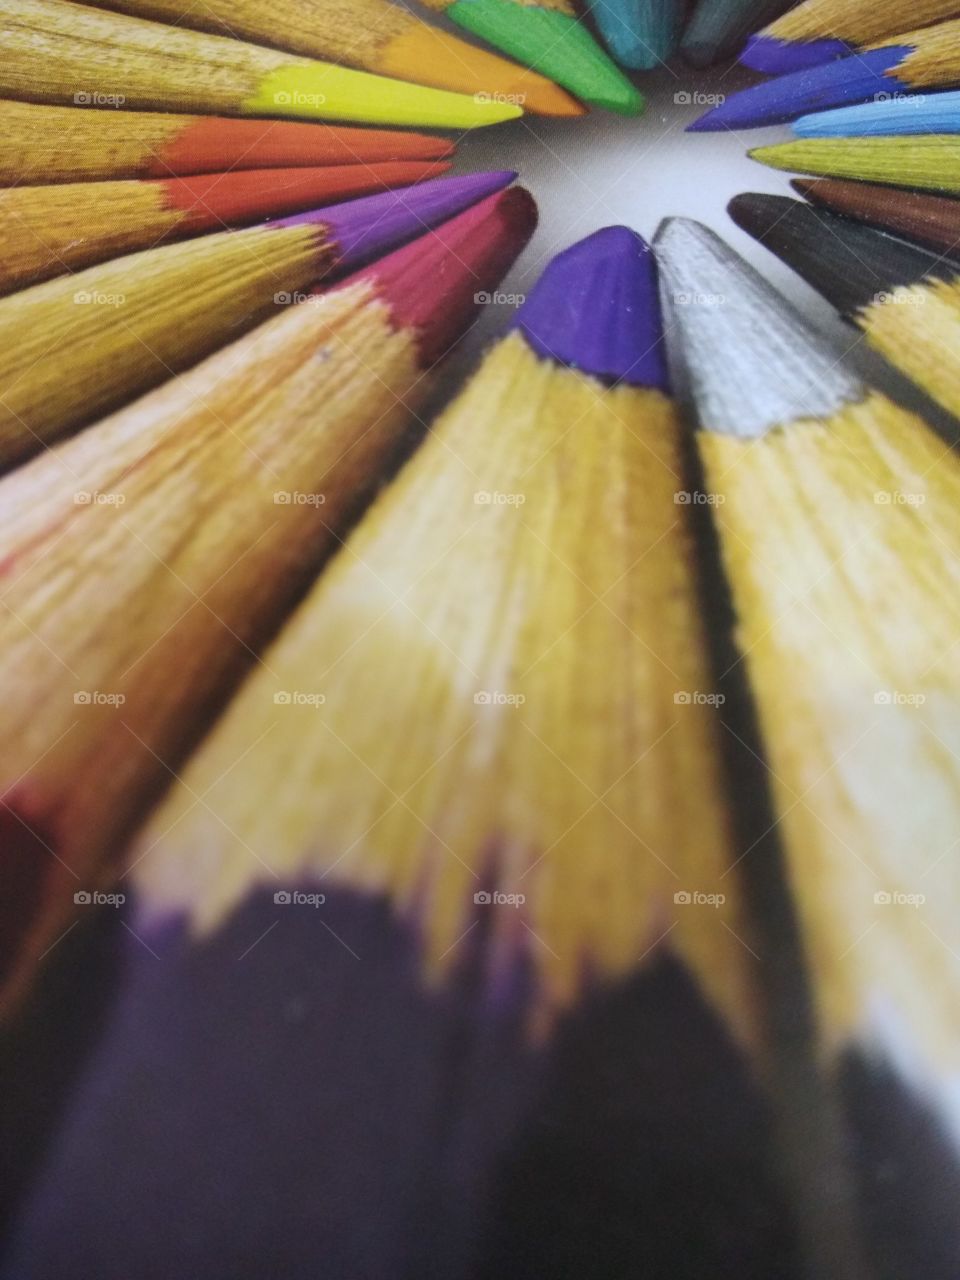 Zoom-up the Pencil Colors